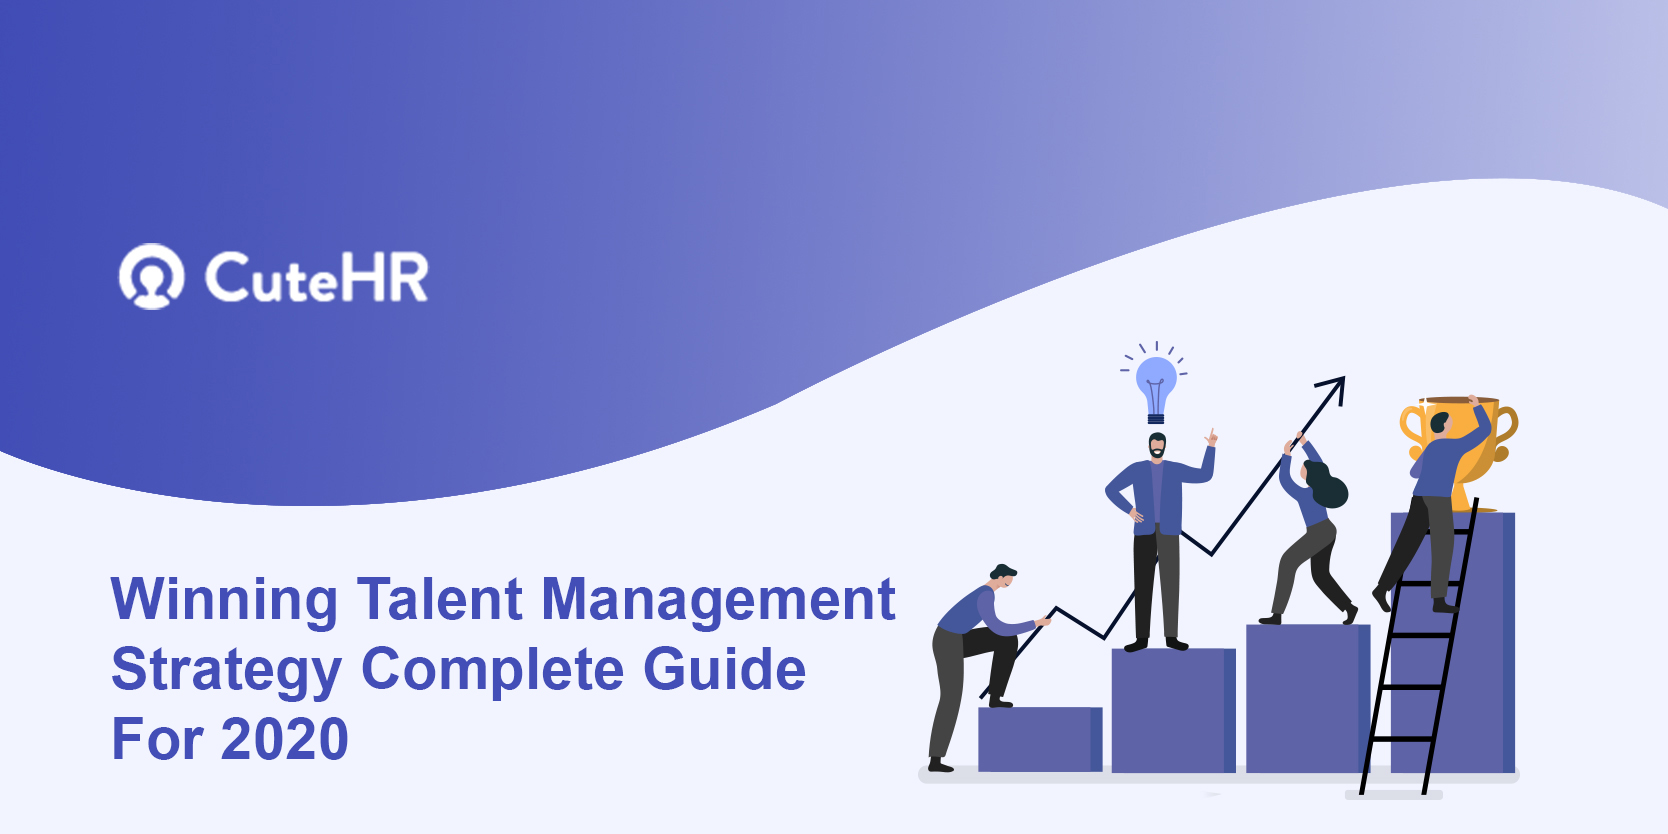 Guide to Complete Talent Management Strategy